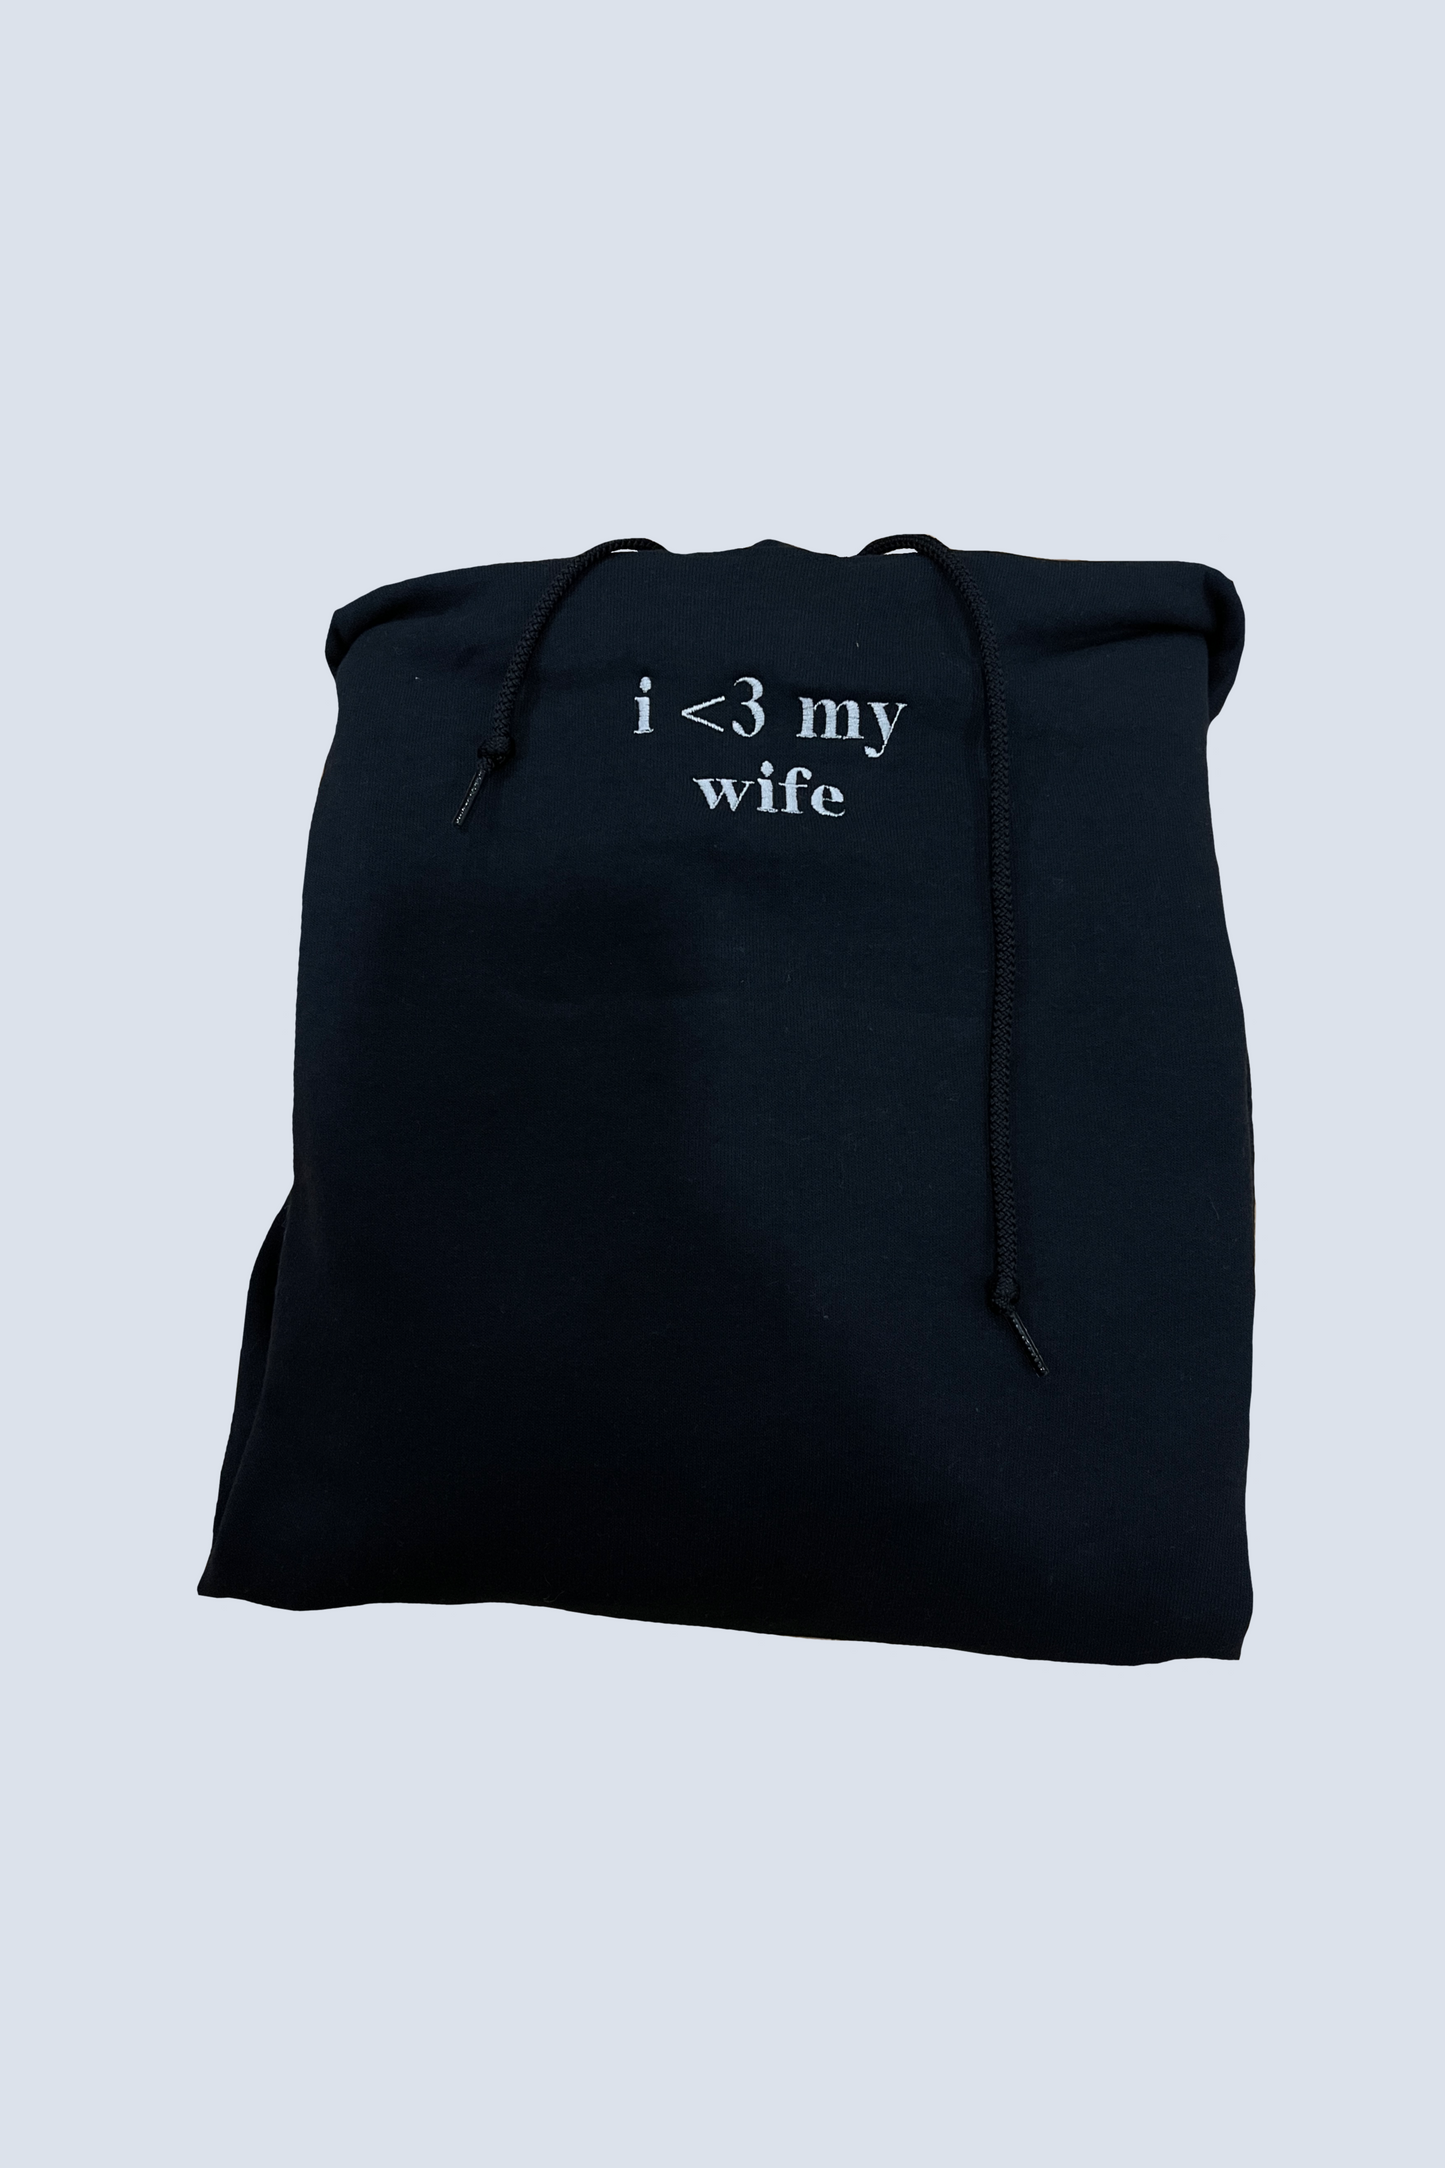 I Love My Husband / Wife Embroidered Matching Set